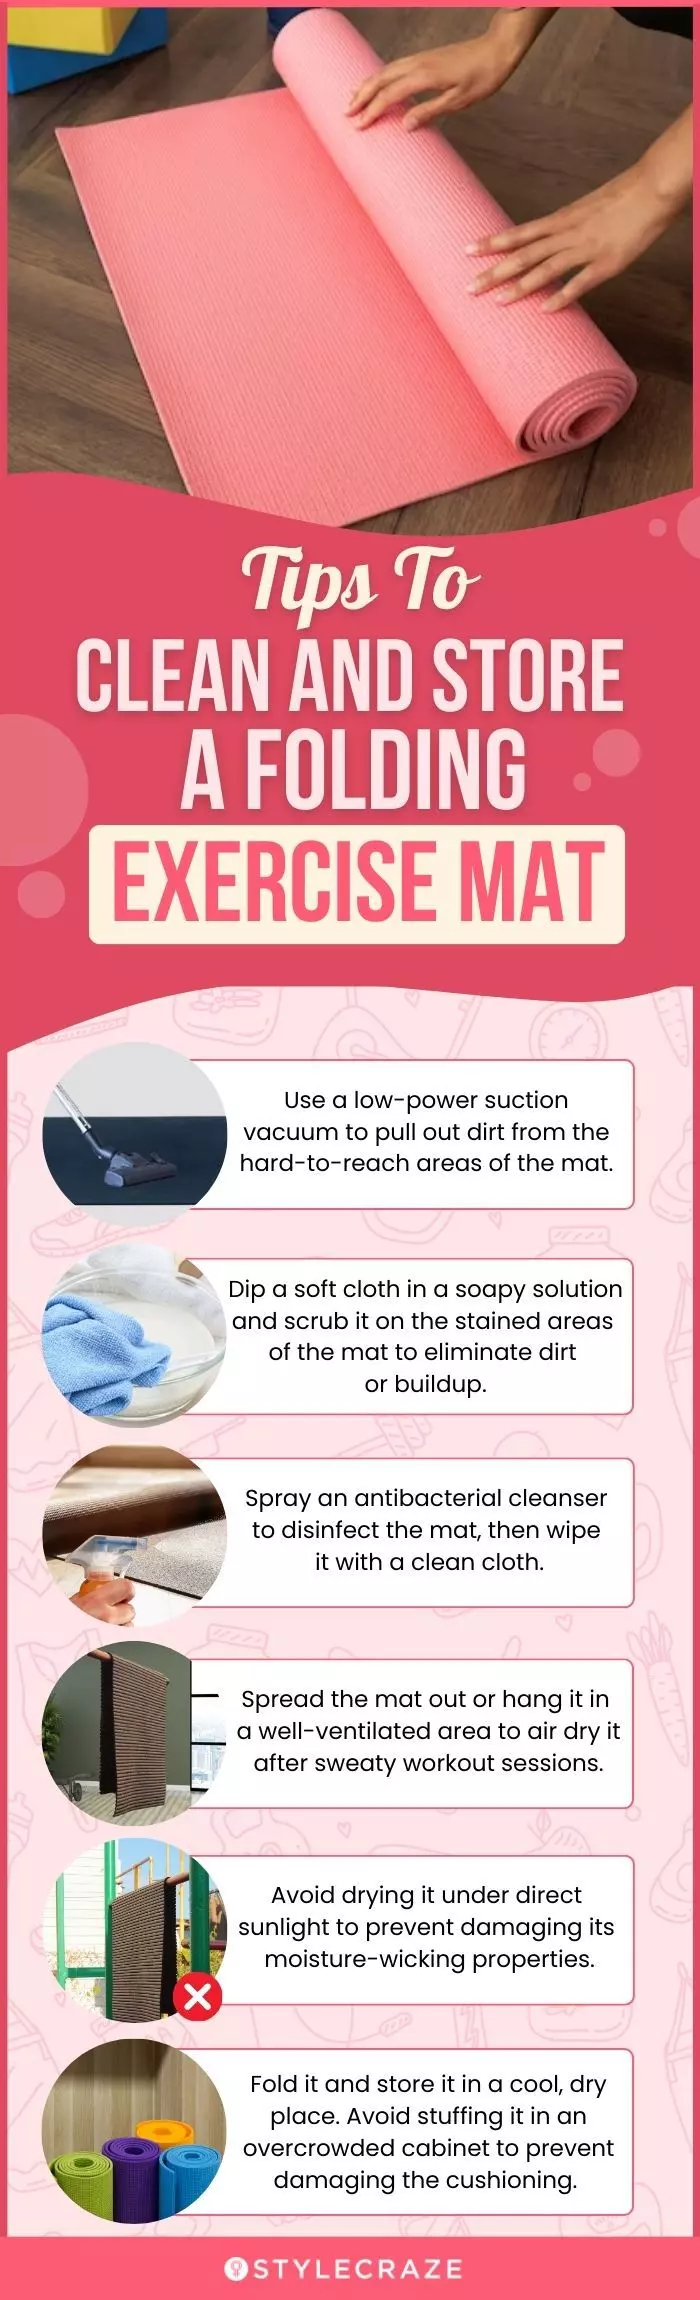 Tips To Clean And Store A Folding Exercise Mat (infographic)